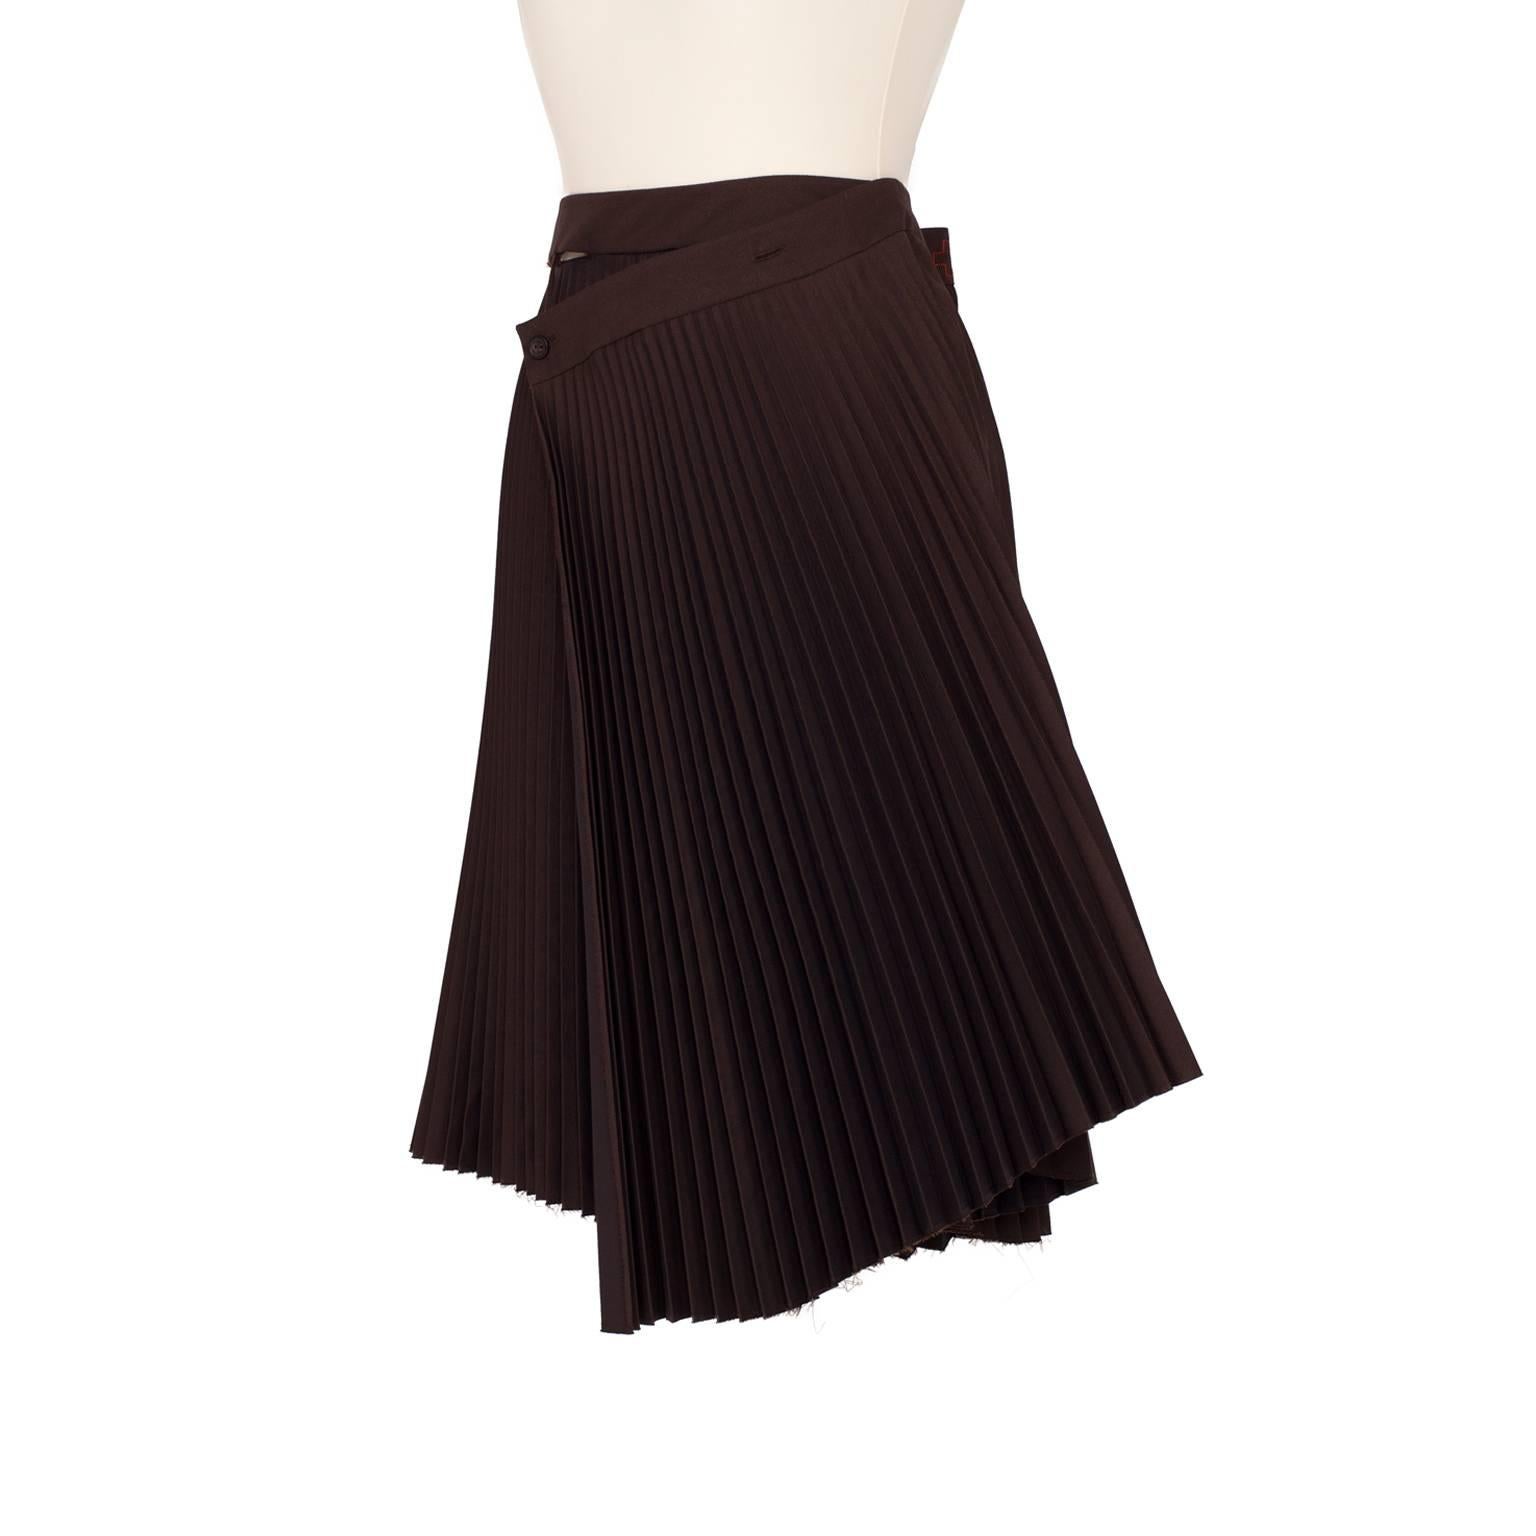 Rare A.F. Vandevorst sculptural wrap pleated skirt in dark brown from 1990s.
Featuring double buttons at the top waist band and pleating throughout the knee length skirt. Amazing piece.

Size 36 - 38 EU / 6 US